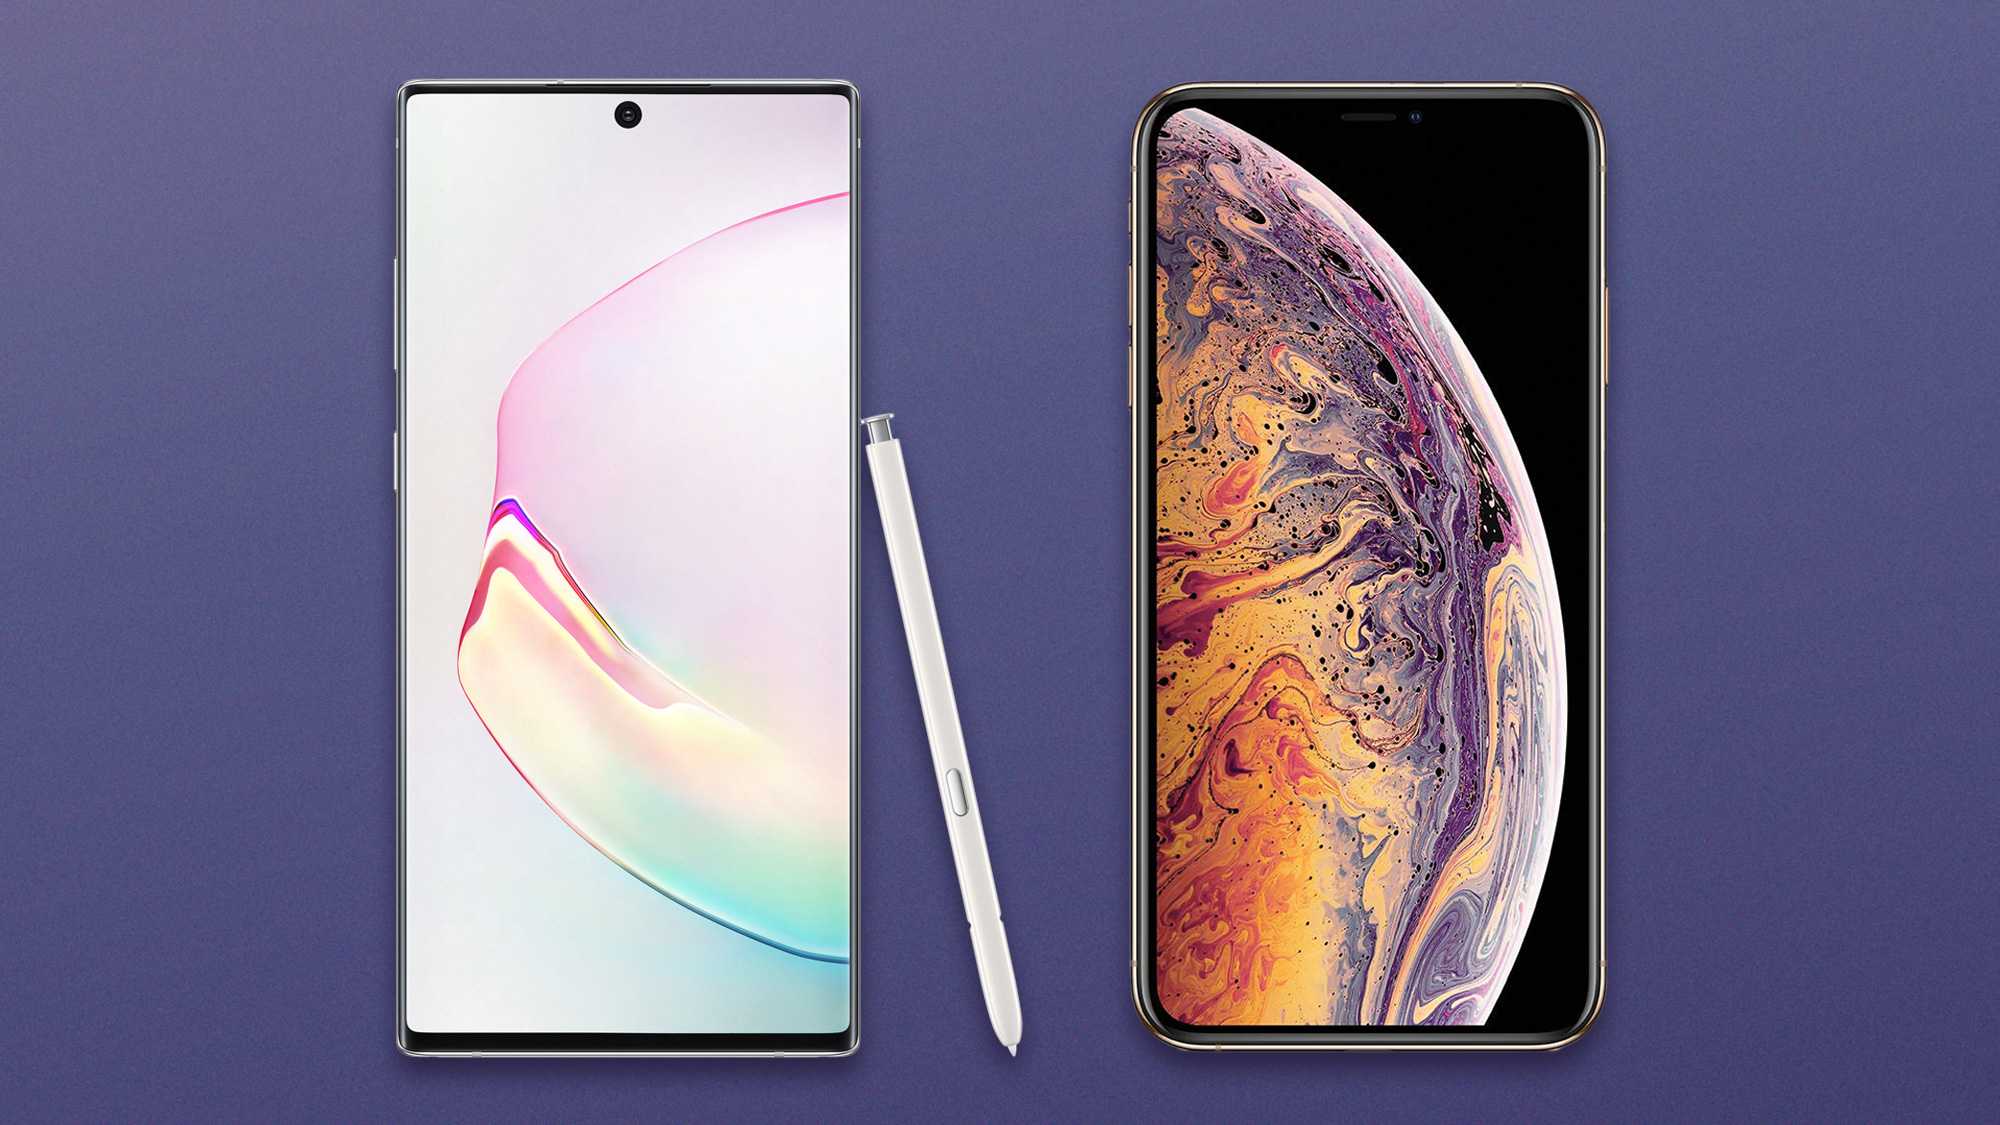 Note 11. Samsung Galaxy Note 10 iphone XS. Samsung Note 11 Pro. Самсунг галакси ноут 10 плюс. Samsung Galaxy Note 11 Plus.